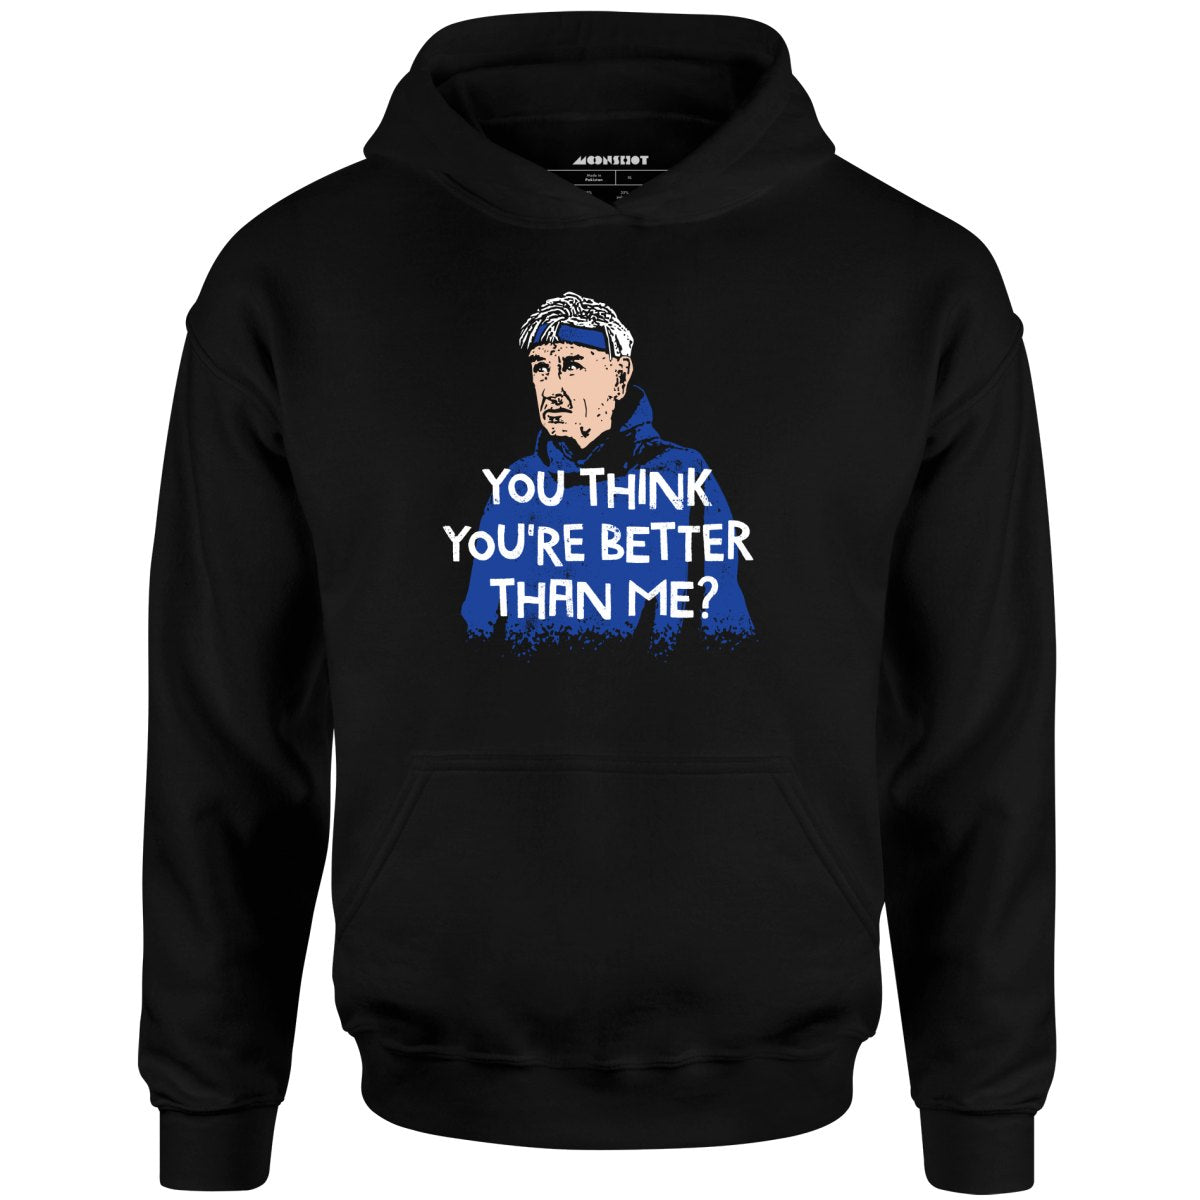 Izzy Mandelbaum - You Think You're Better Than Me? - Unisex Hoodie